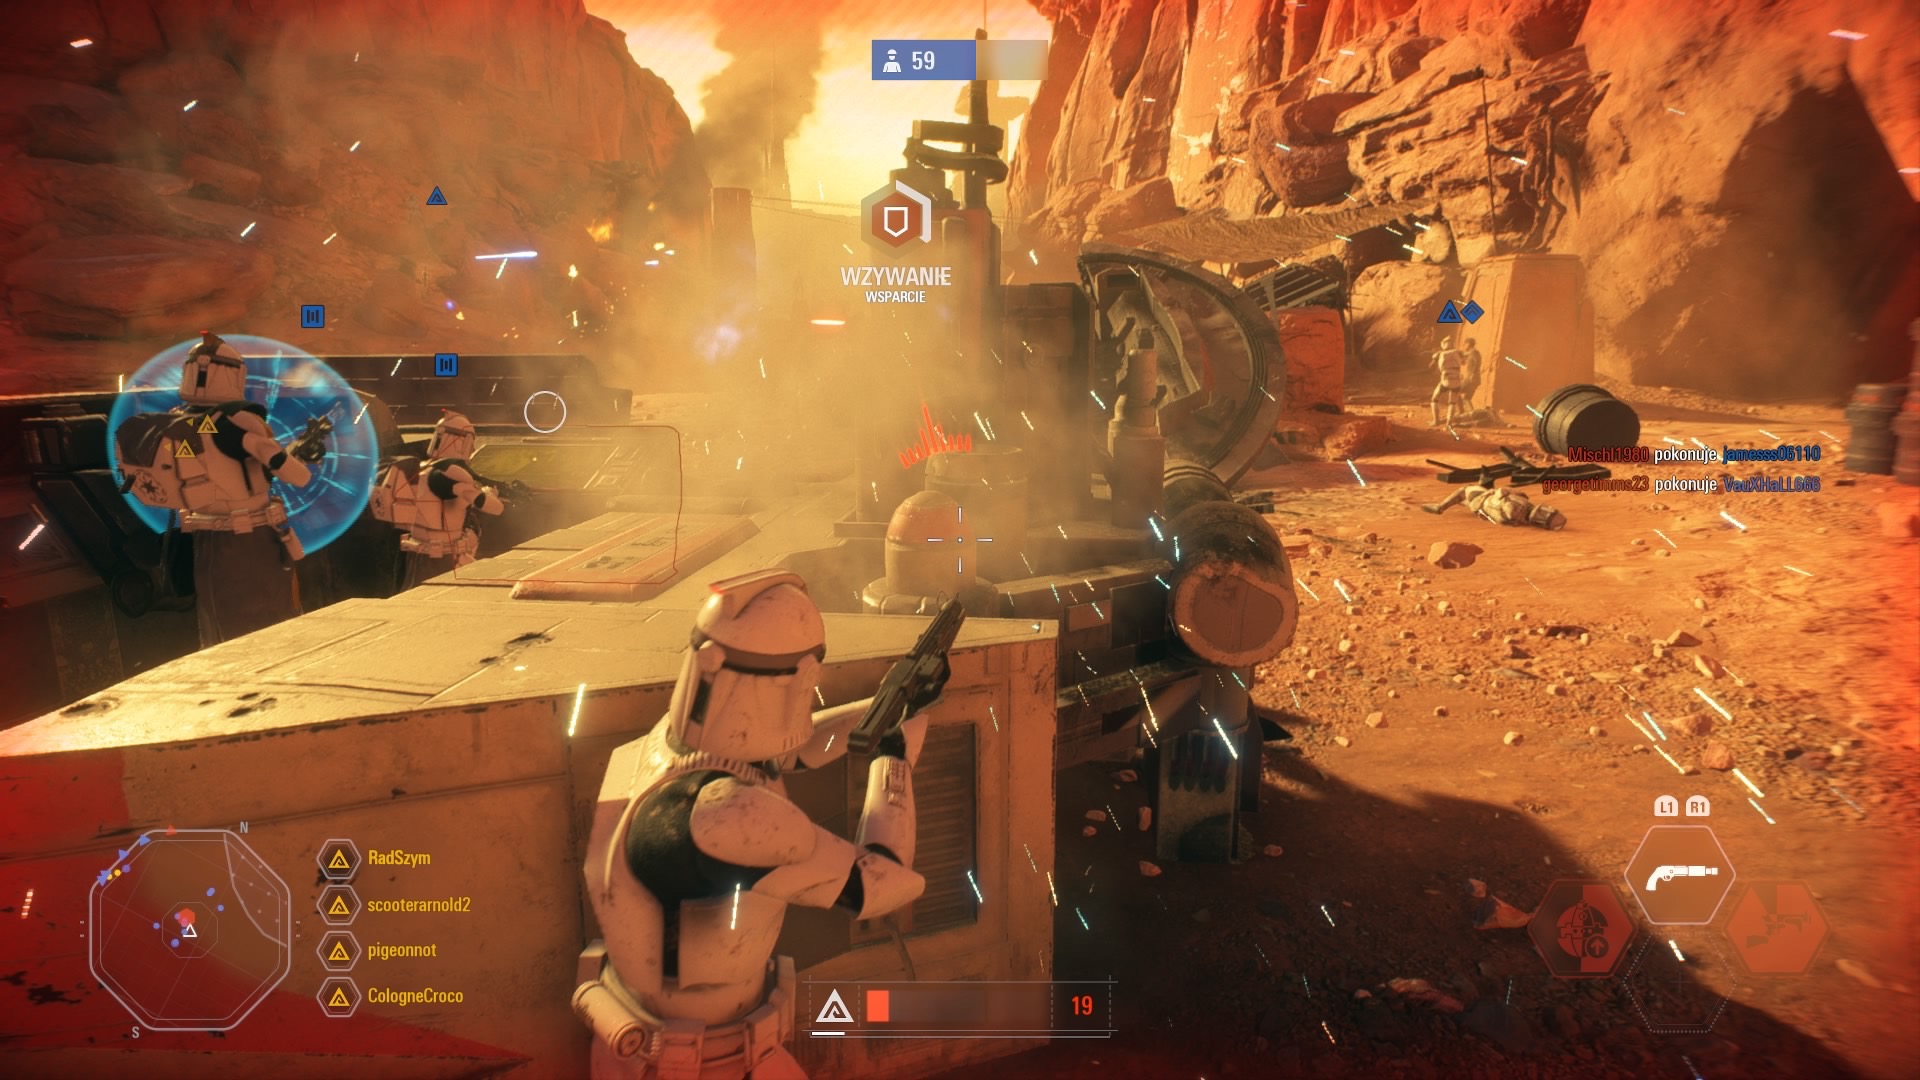 Geonosis gets to Battlefront II. A supposedly iconic location, but the ...